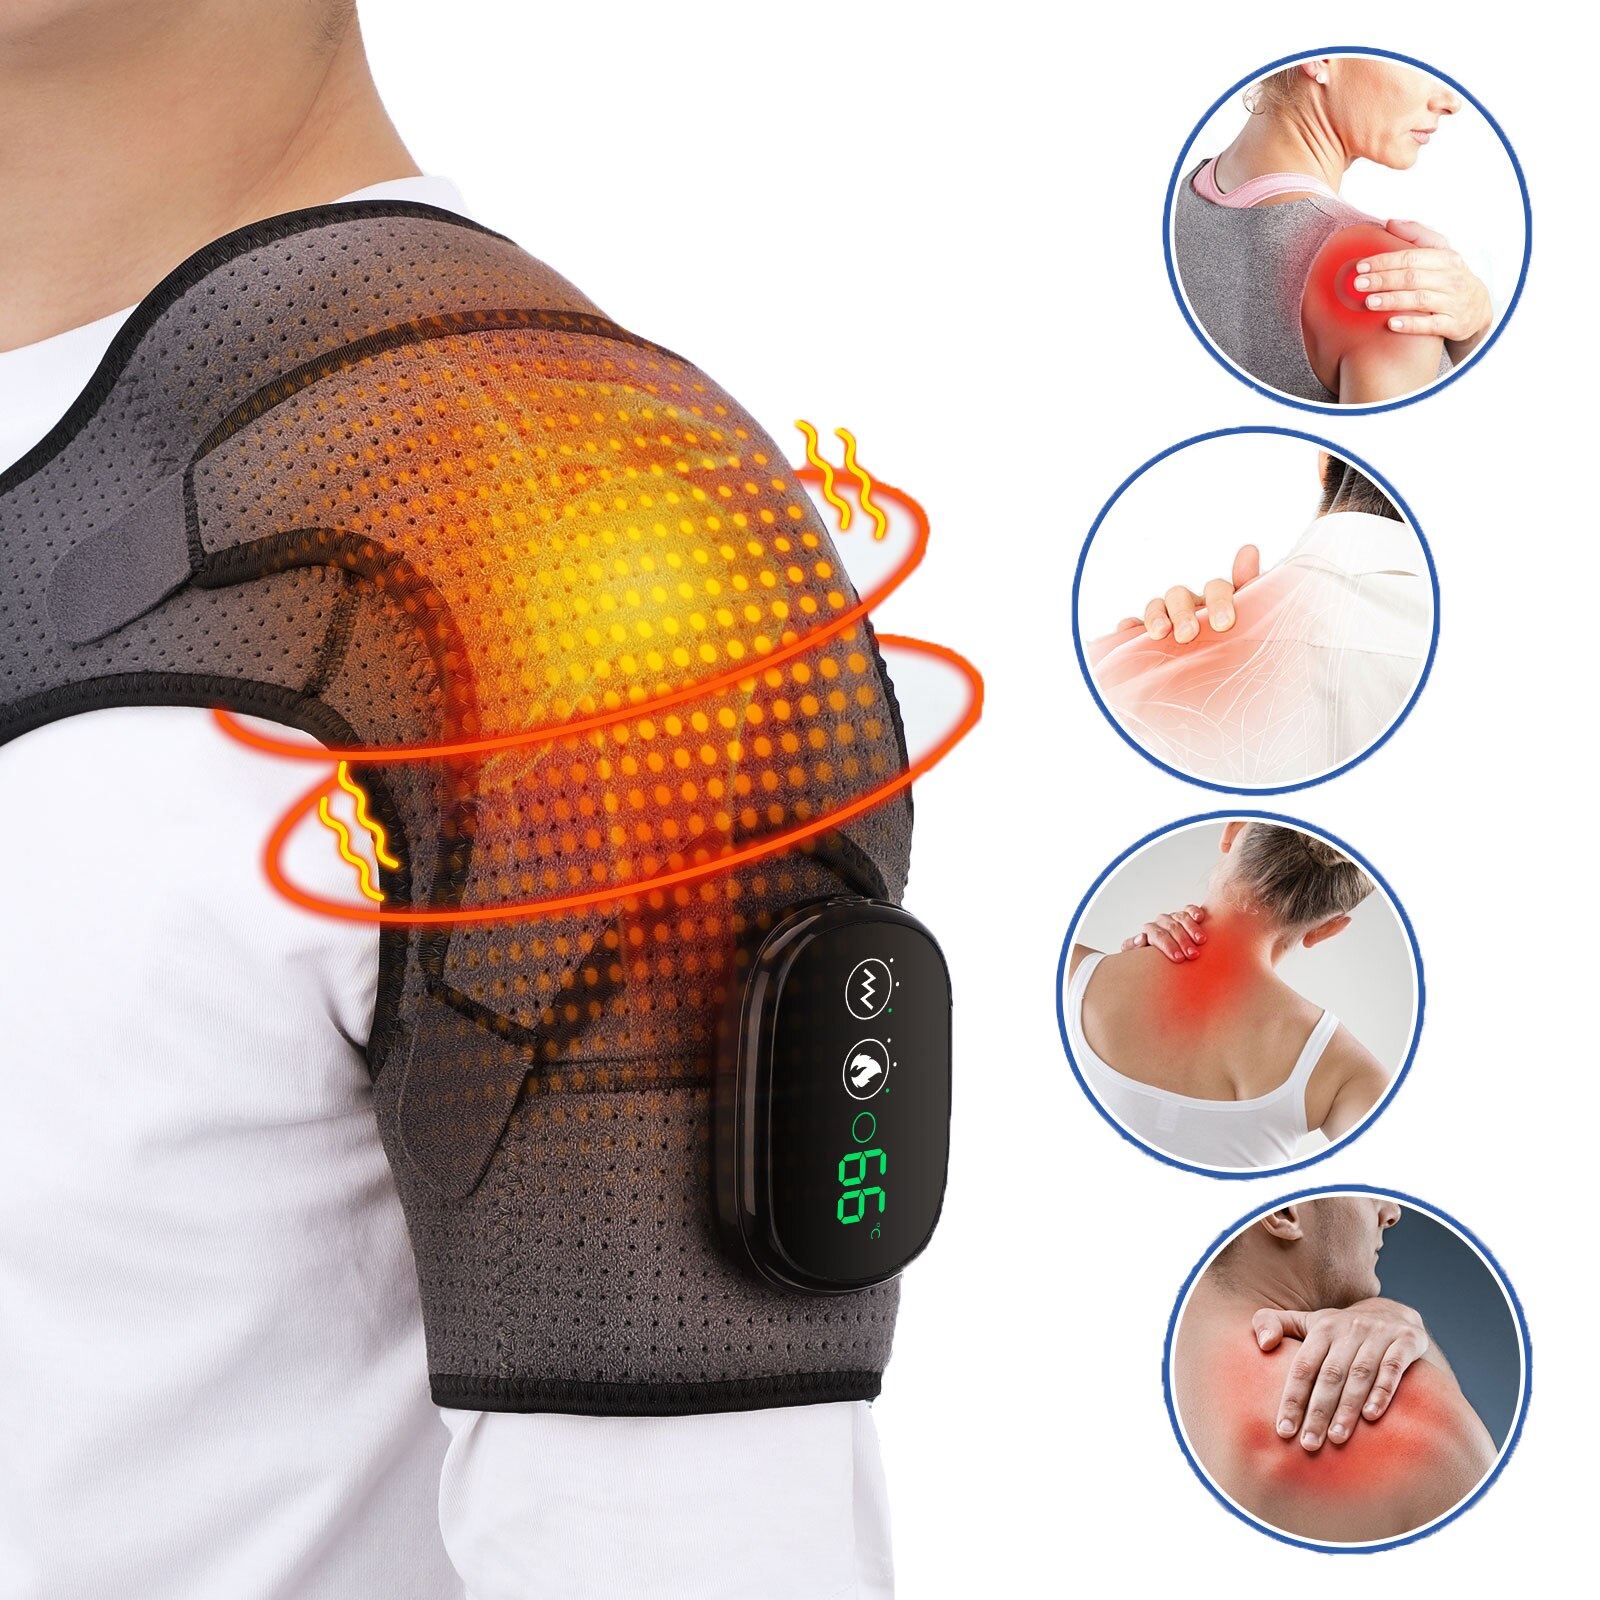 Heating Vabration Shoulder Massage Brace 3 Levels Physiotherapy Therapy Pain Relief Left Right Electric Battery Heated Massage